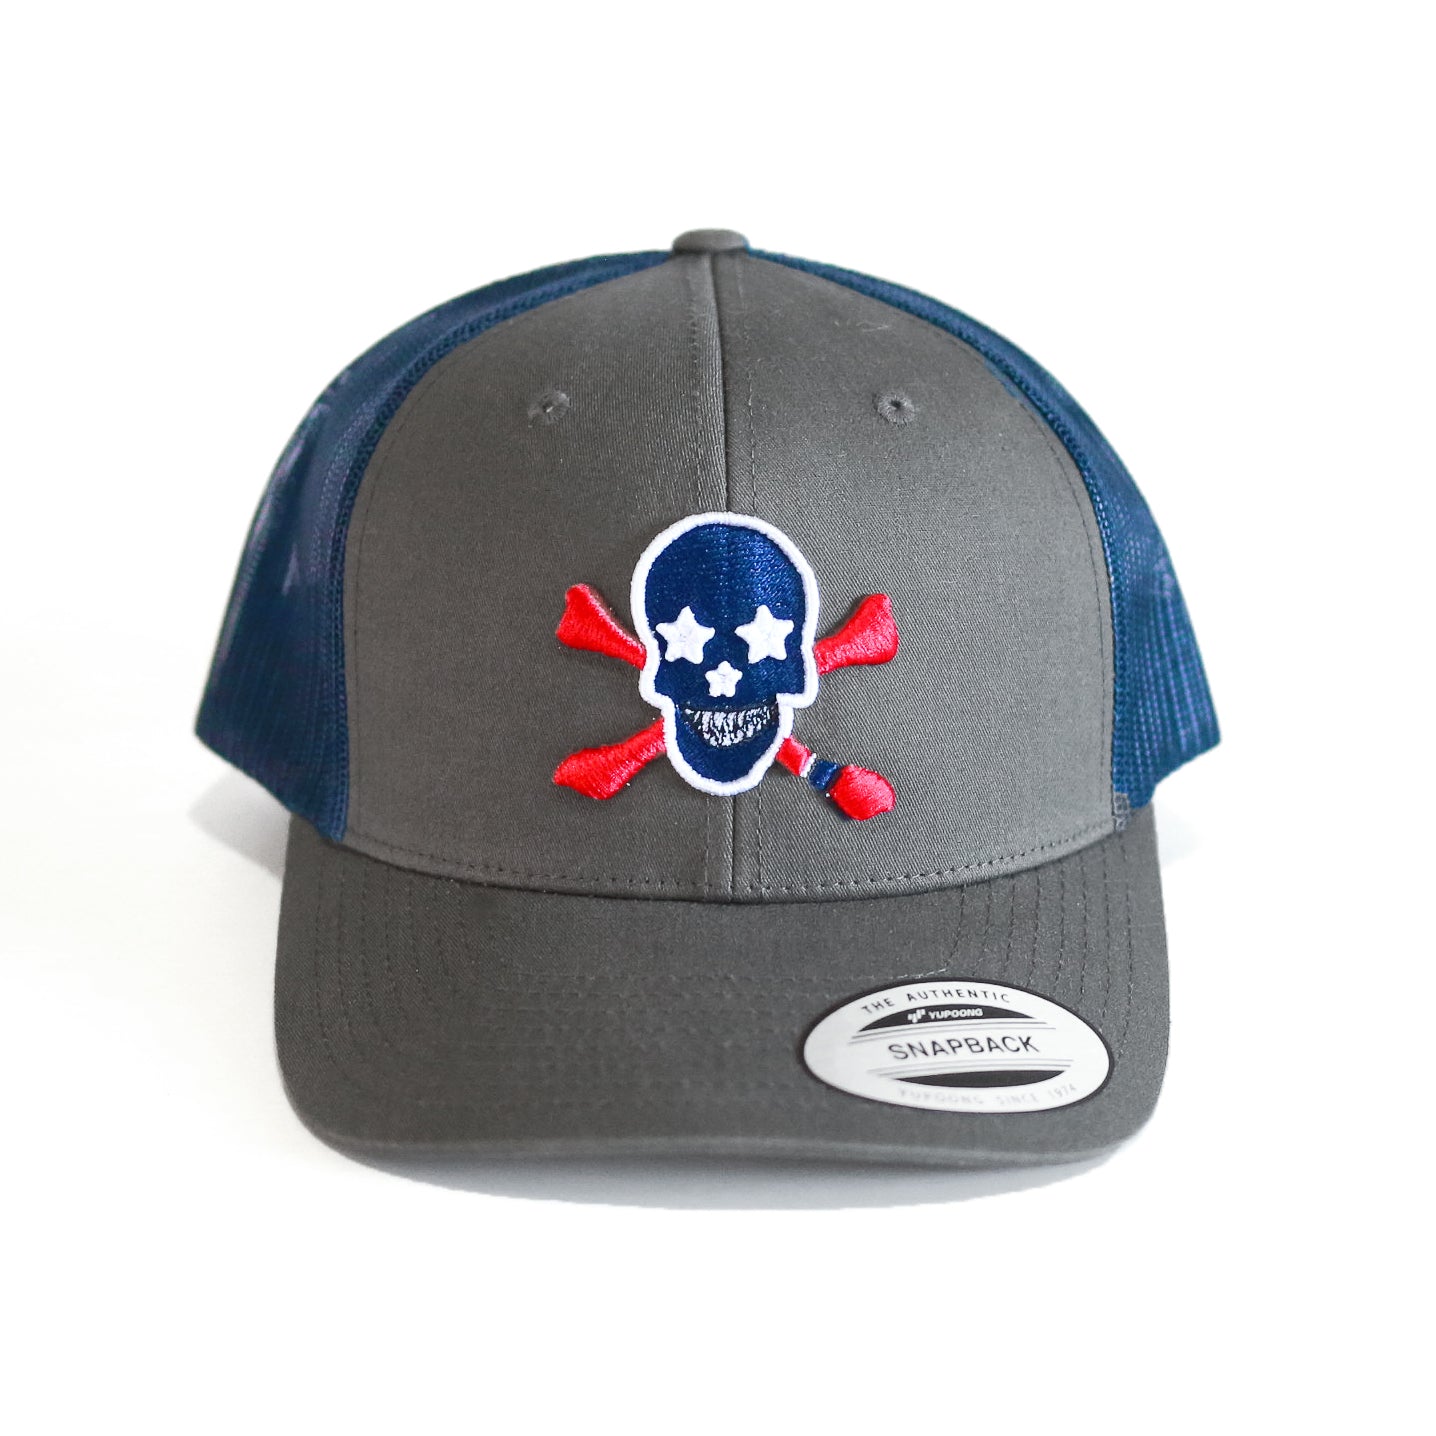 The Classic Trucker - Charcoal/Navy